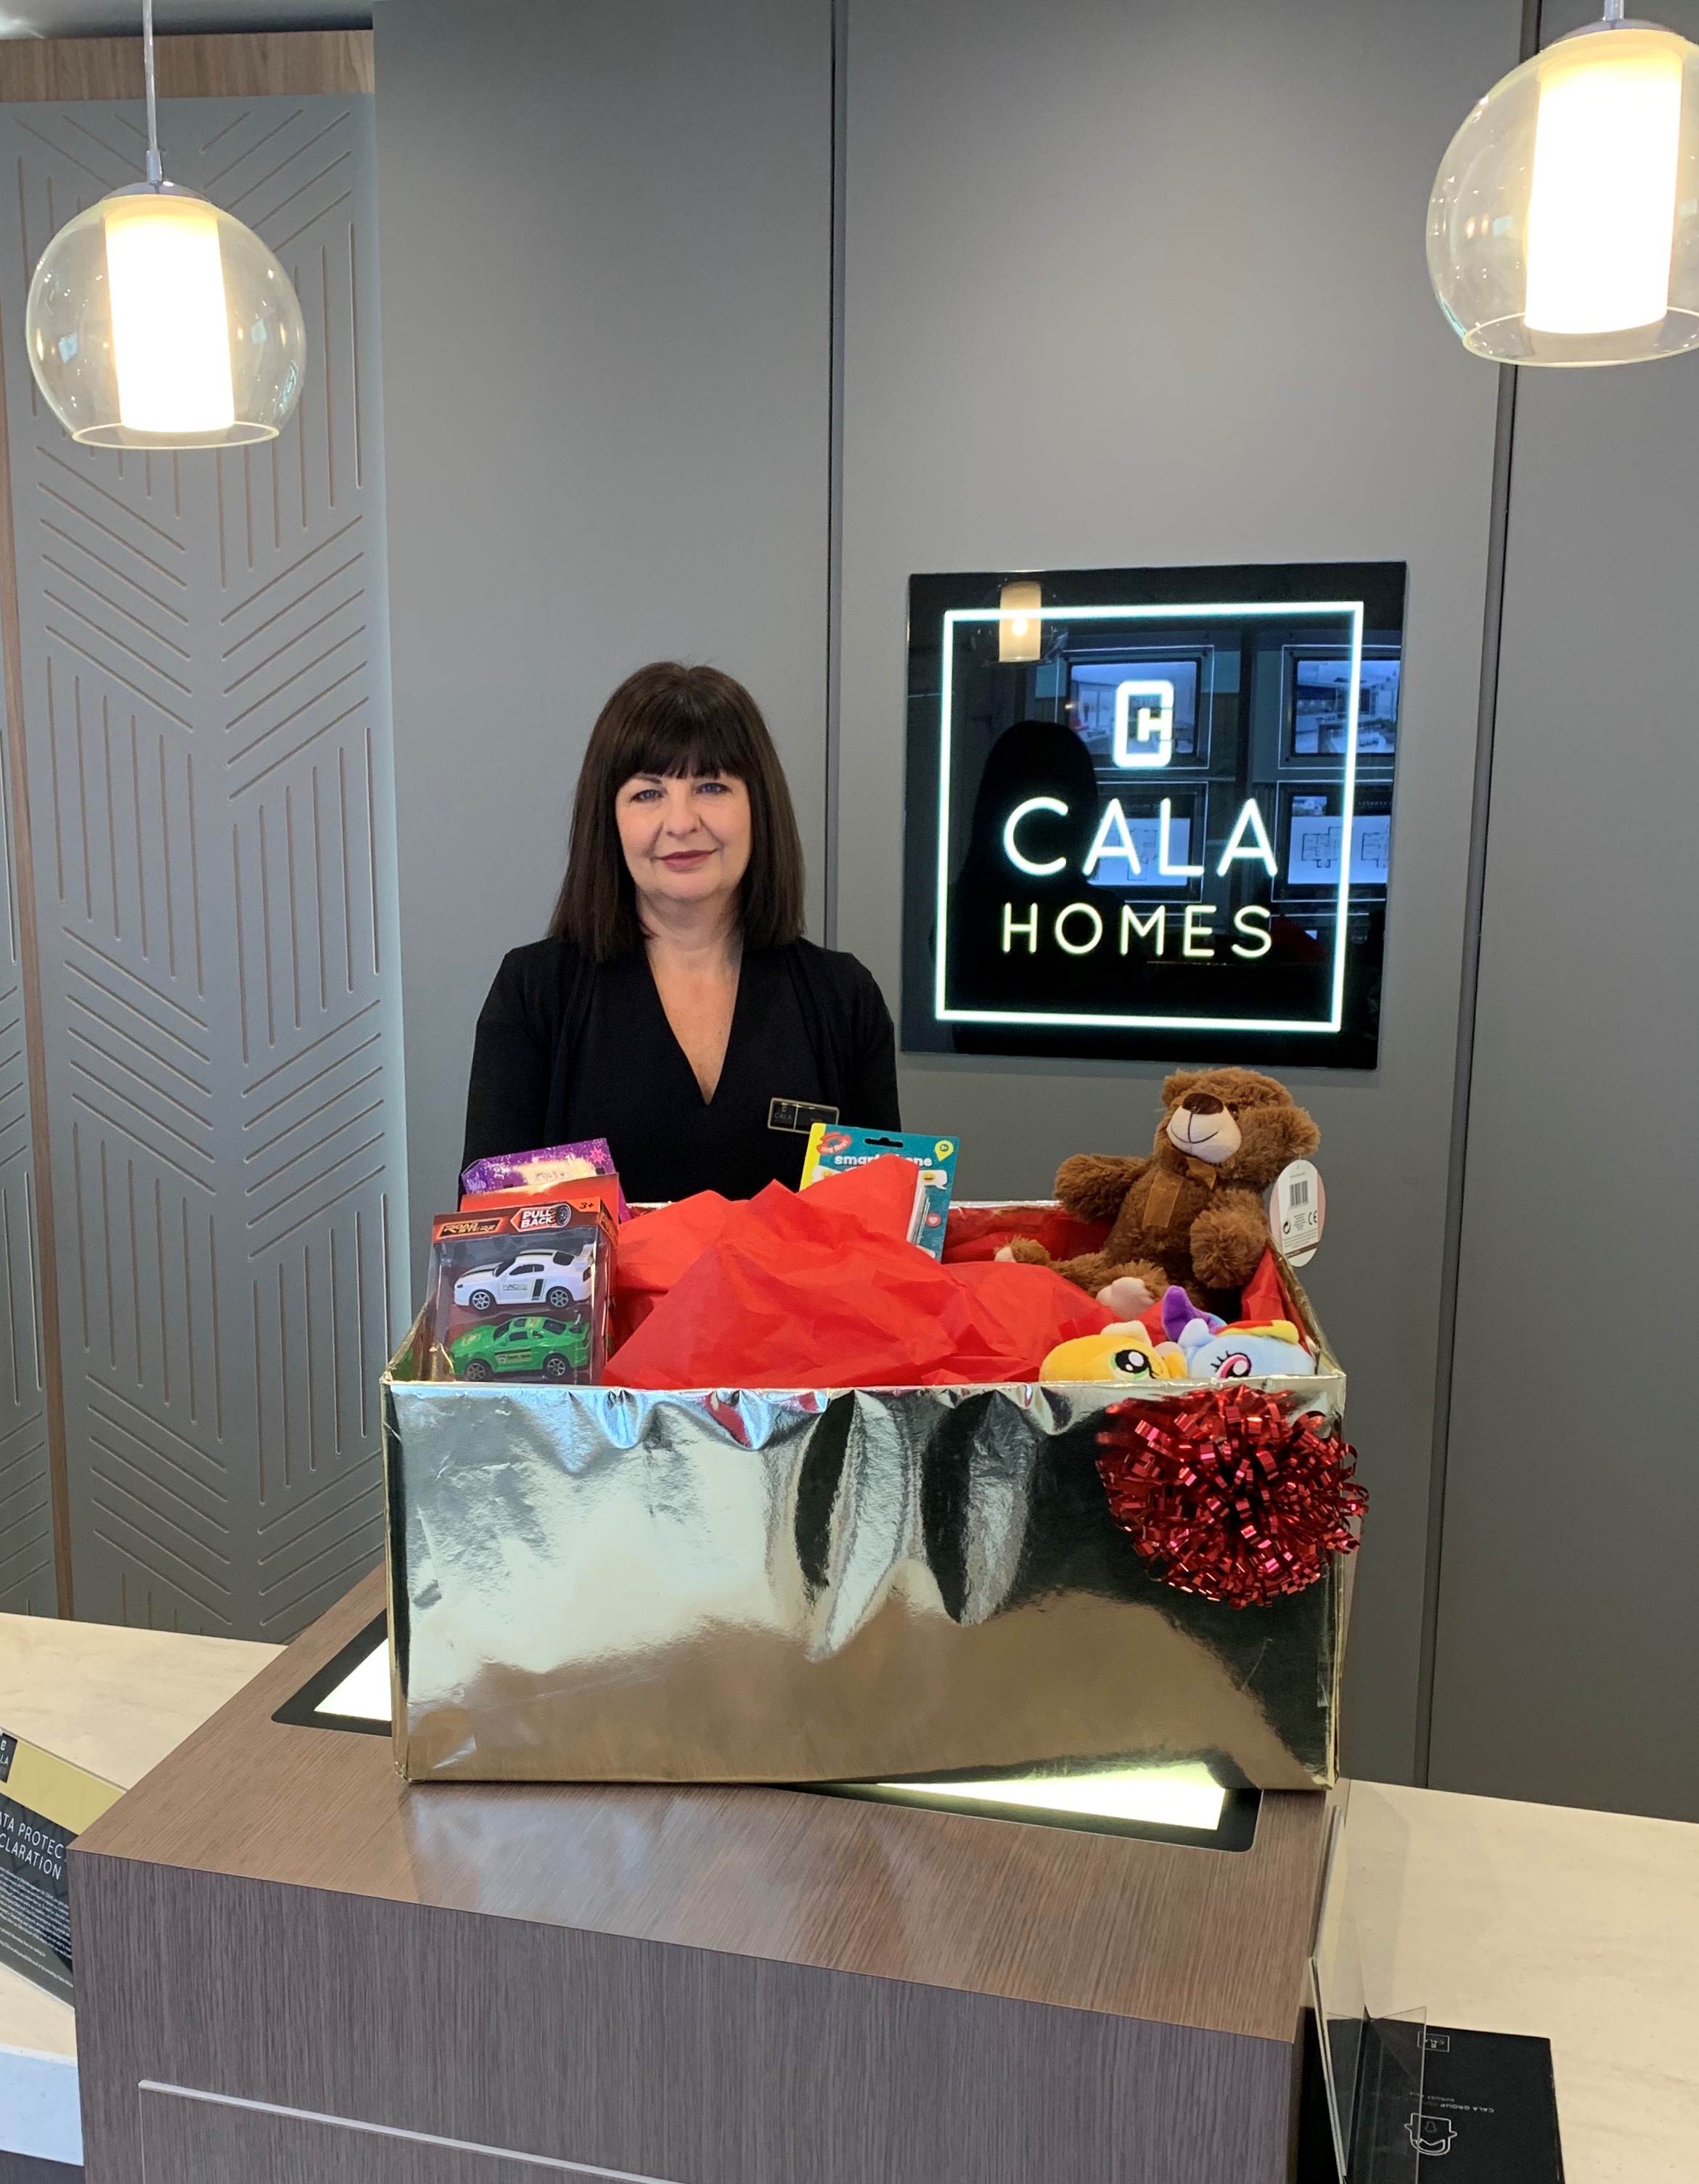 CALA Homes joins with Salvation Army in Christmas toy appeal